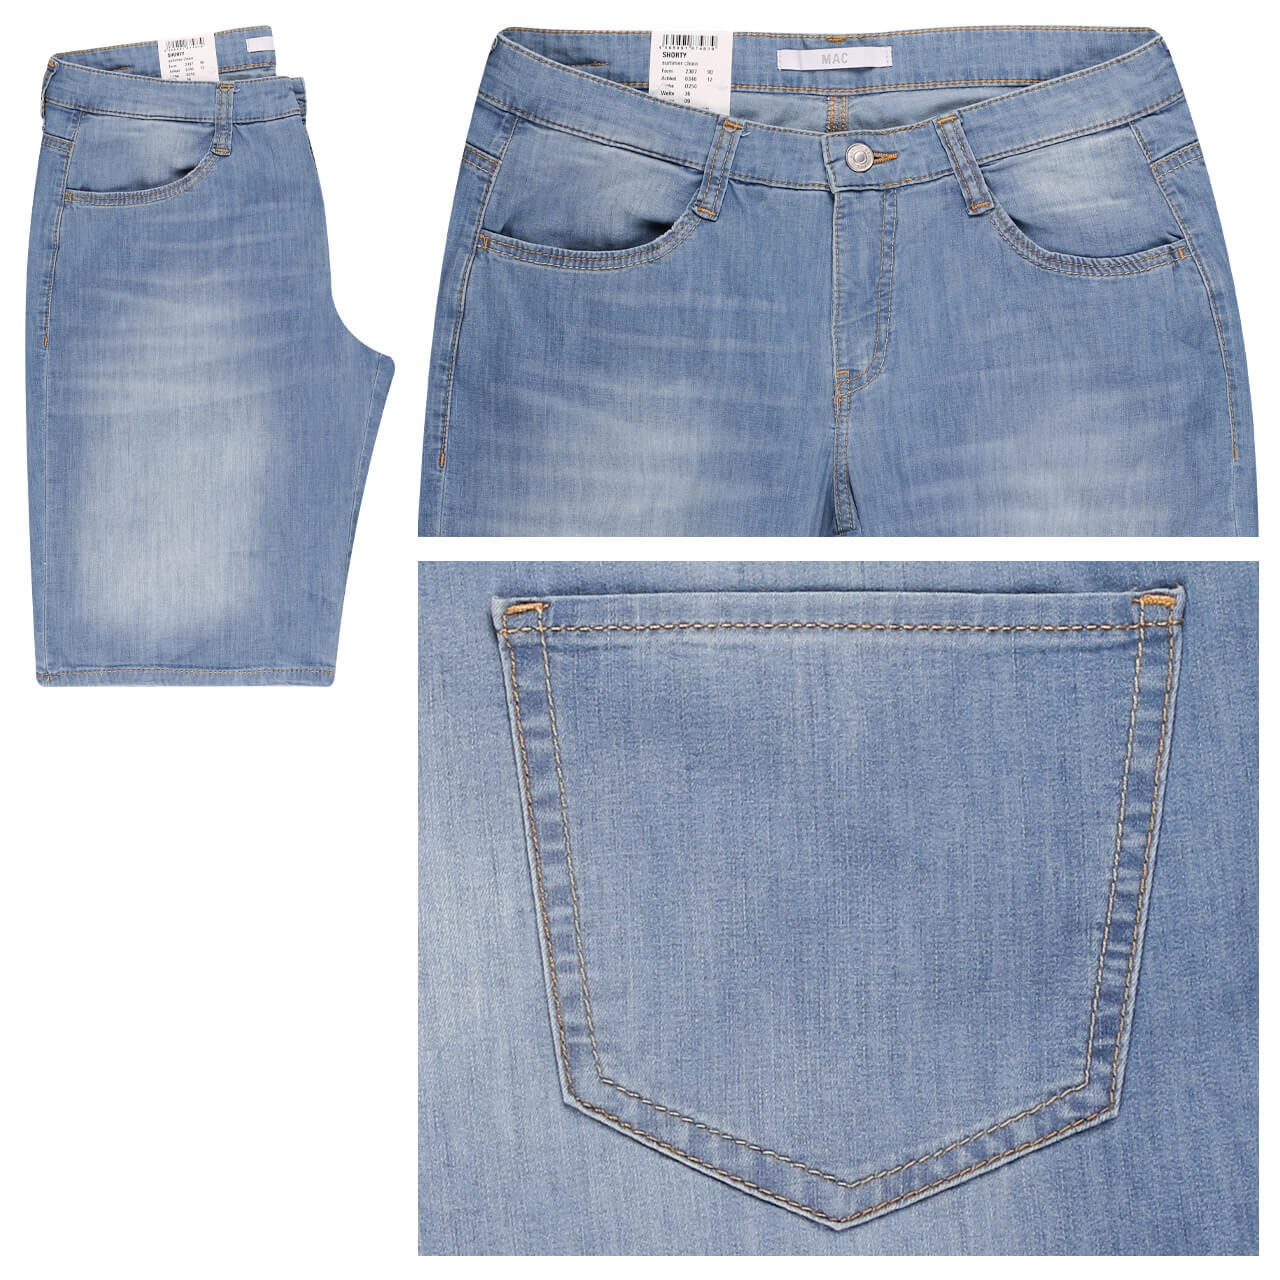 MAC Shorty Jeans authentic use wash